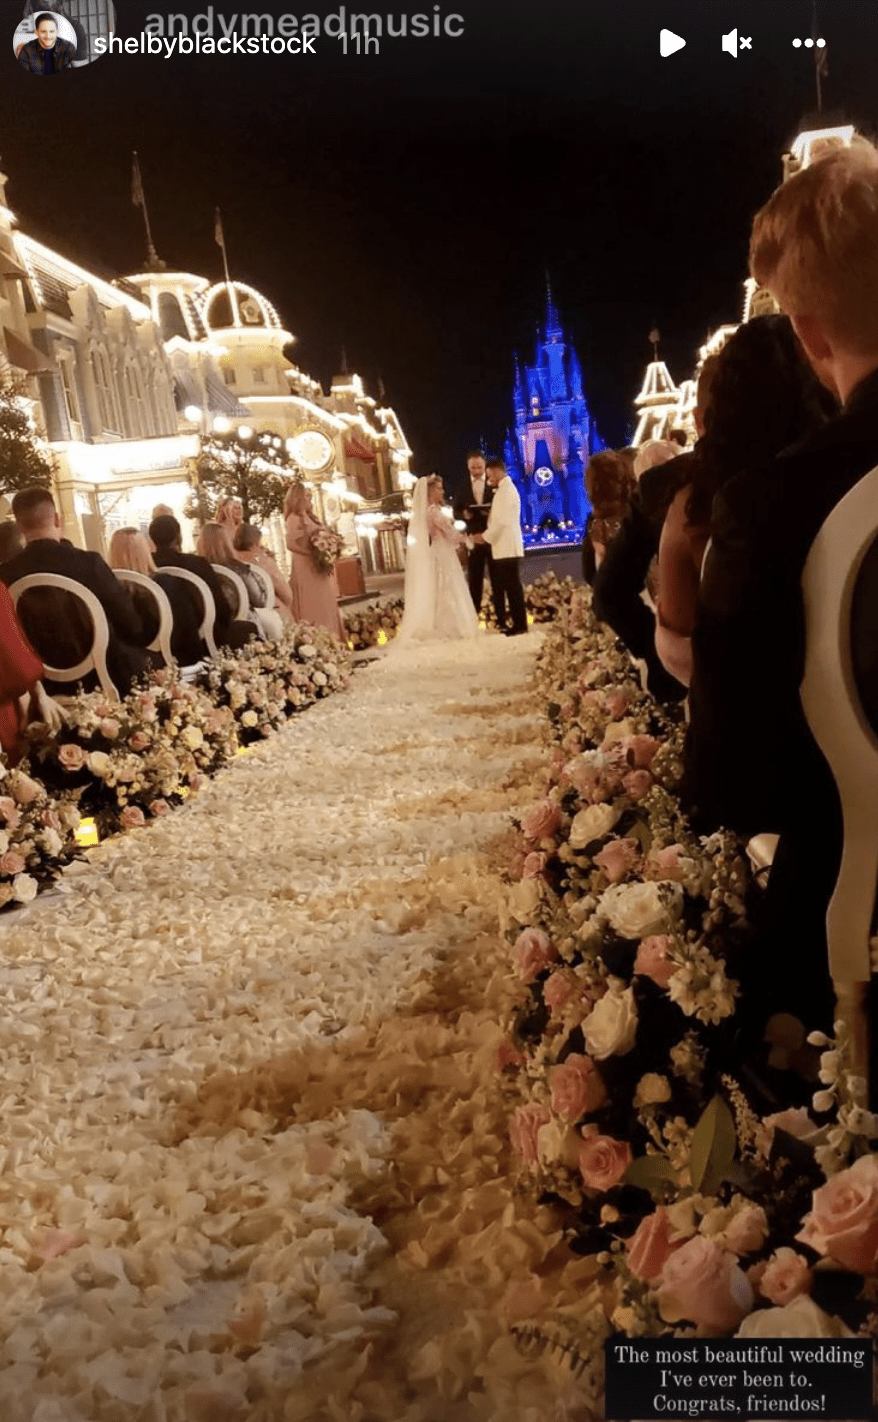 Shelby Blackstock with his wife, Marissa Branch, during their wedding at Walt Disney World on February 12, 2022. | Source: Instagram.com/Shelbyblackstock